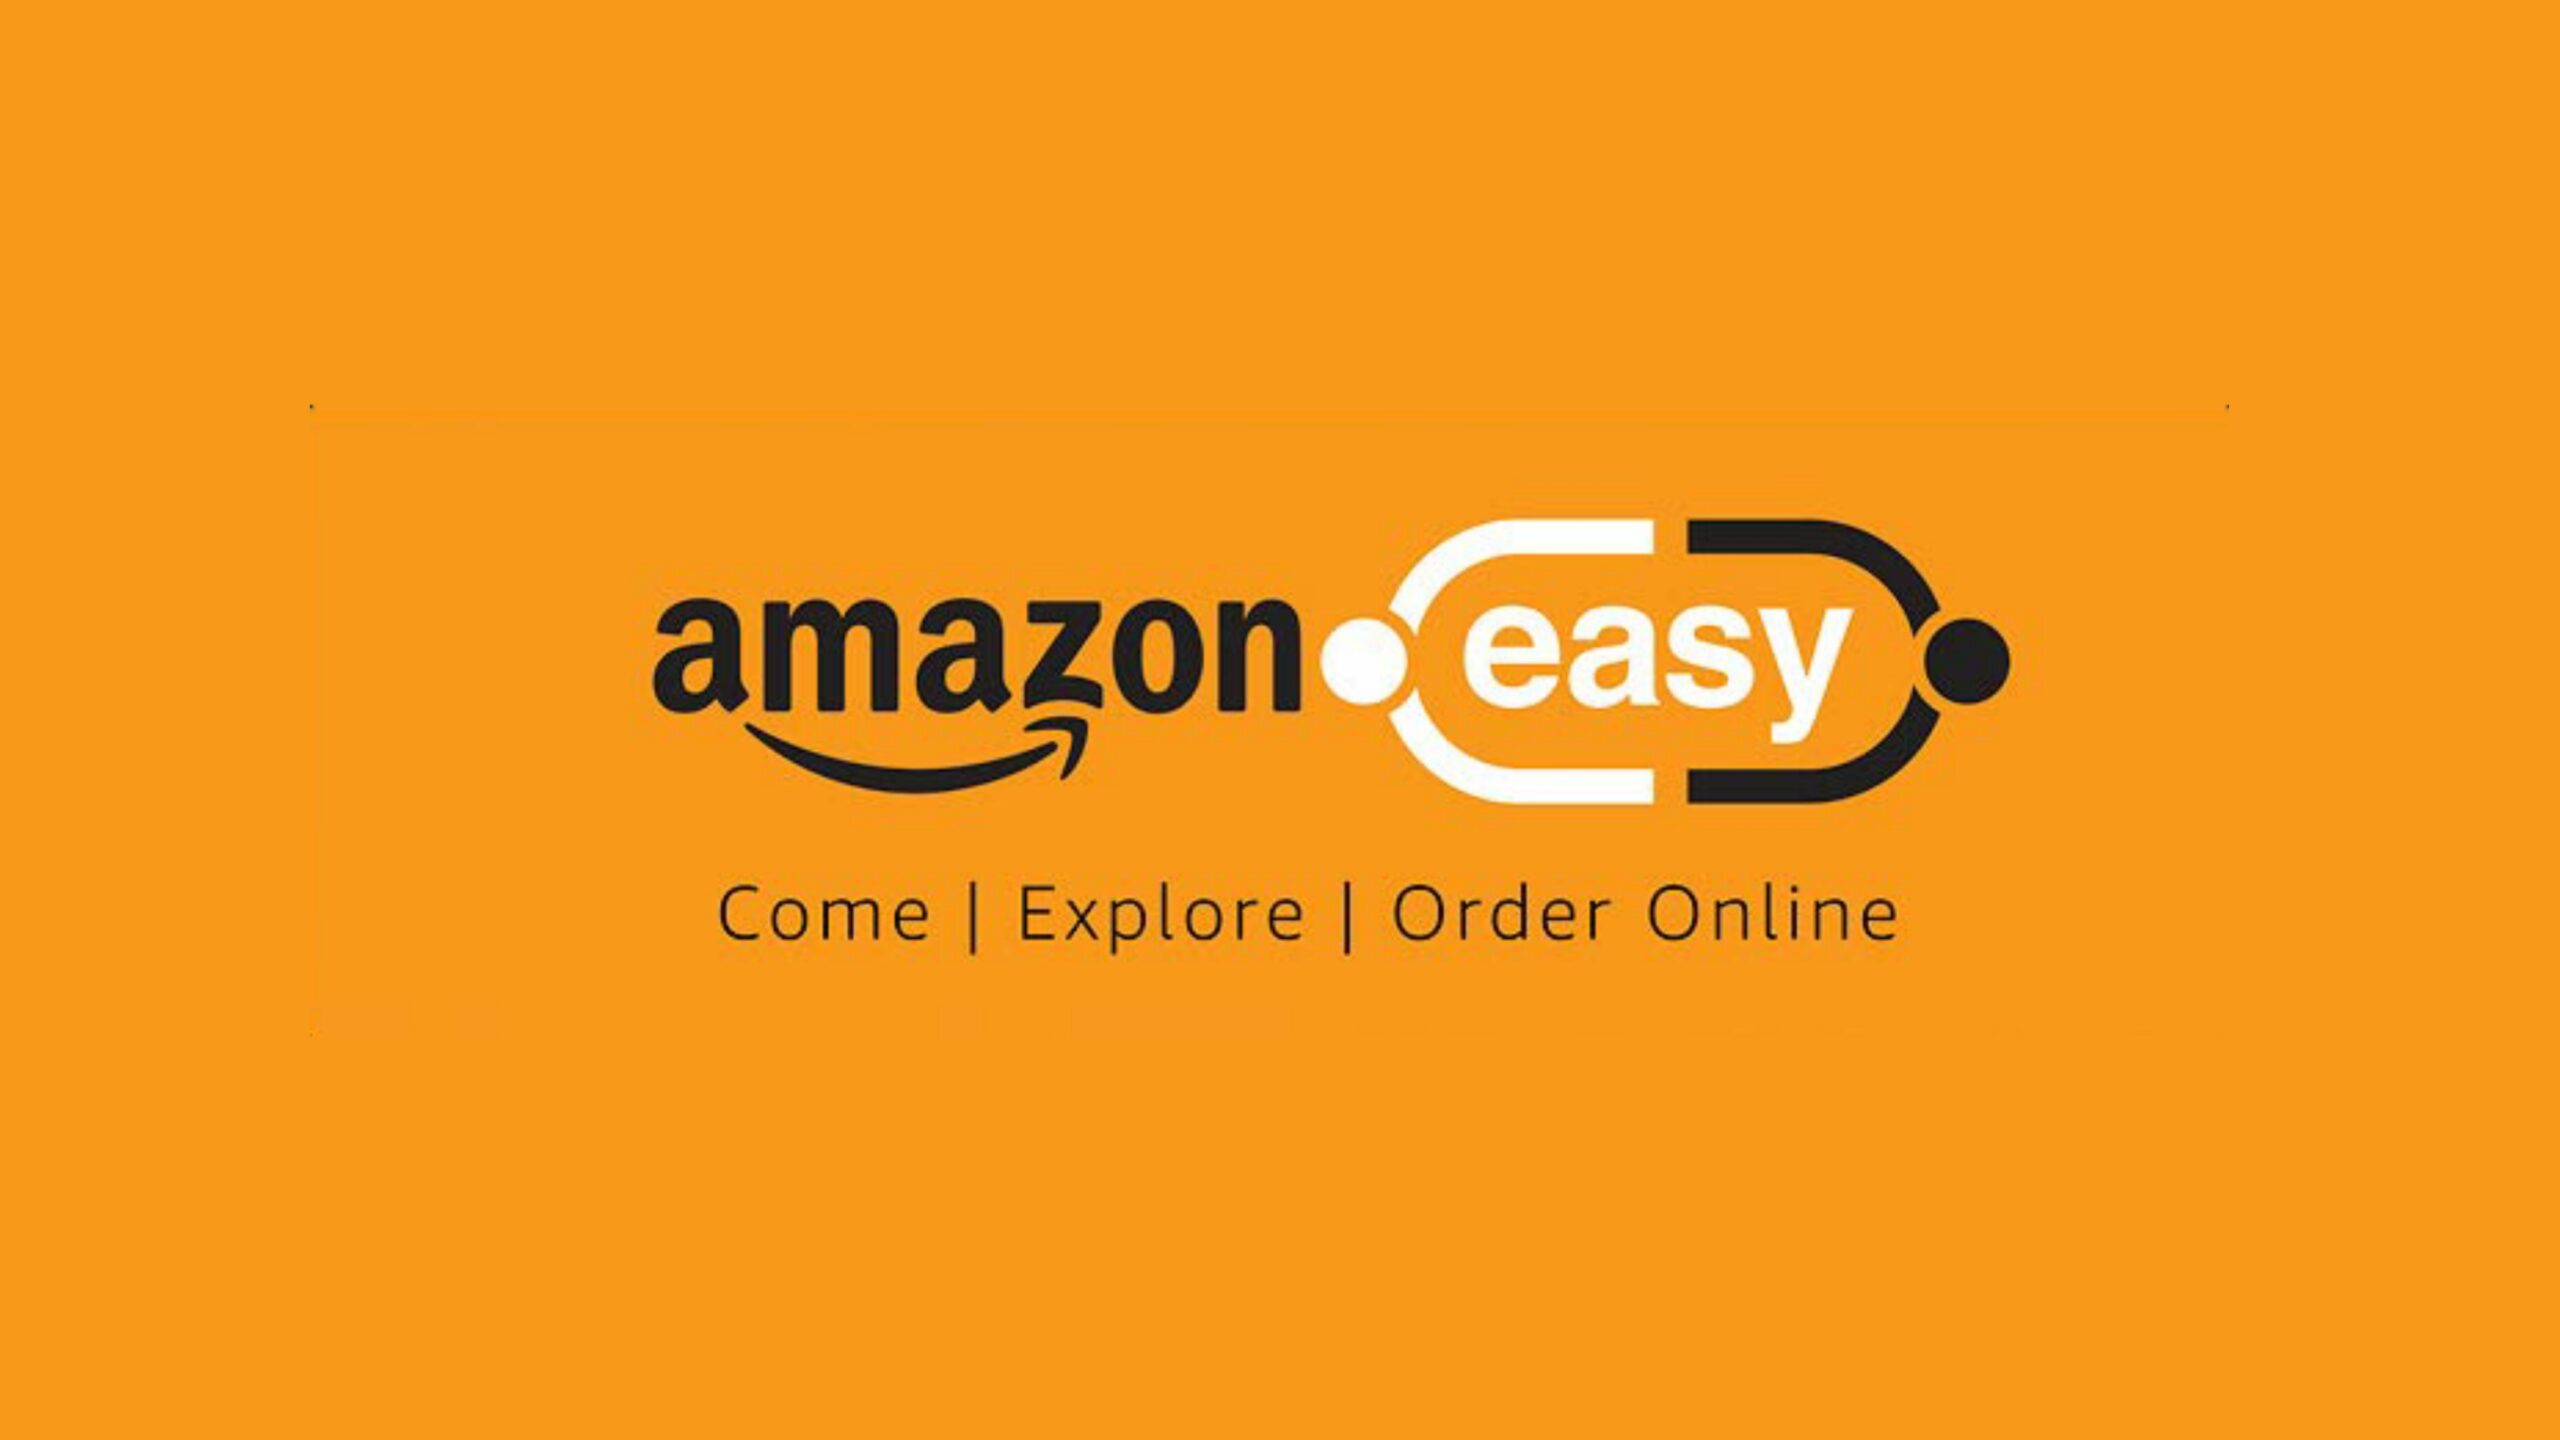 Amazon Easy stores in India are upgraded, offering touch and feel product experience